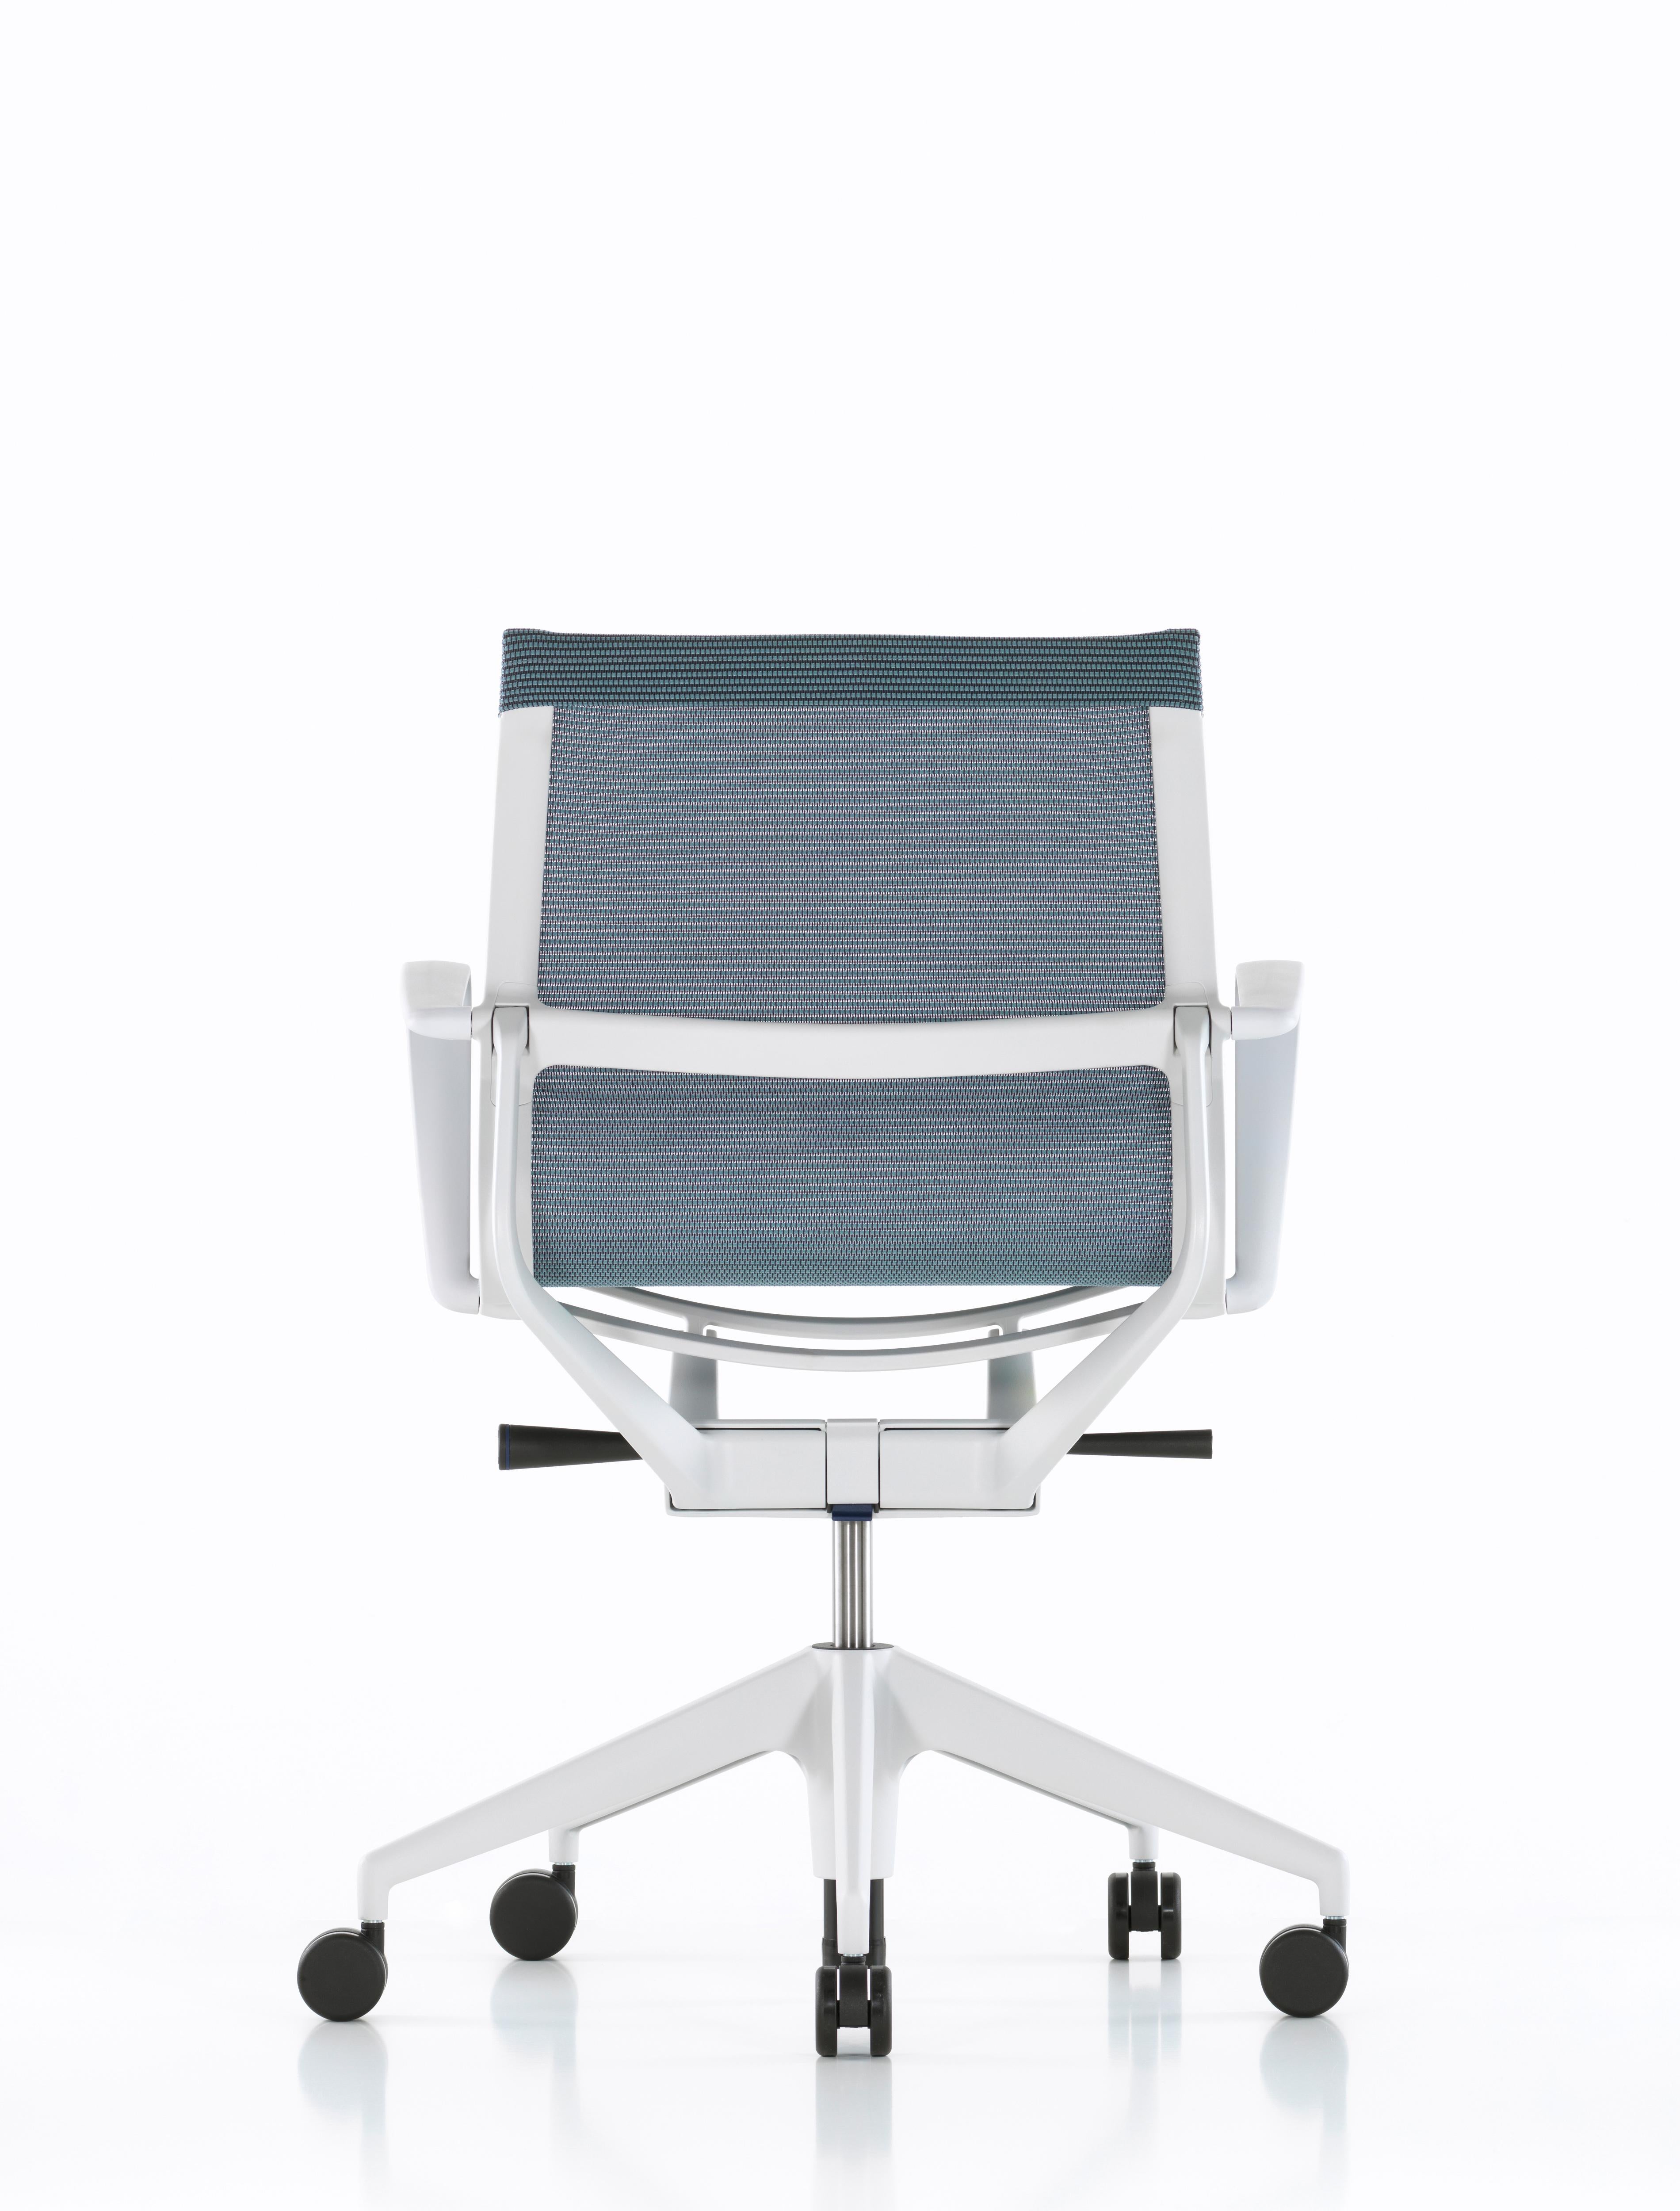 Modern Vitra Physix Chair in Ice Grey Fleece Net by Alberto Meda For Sale